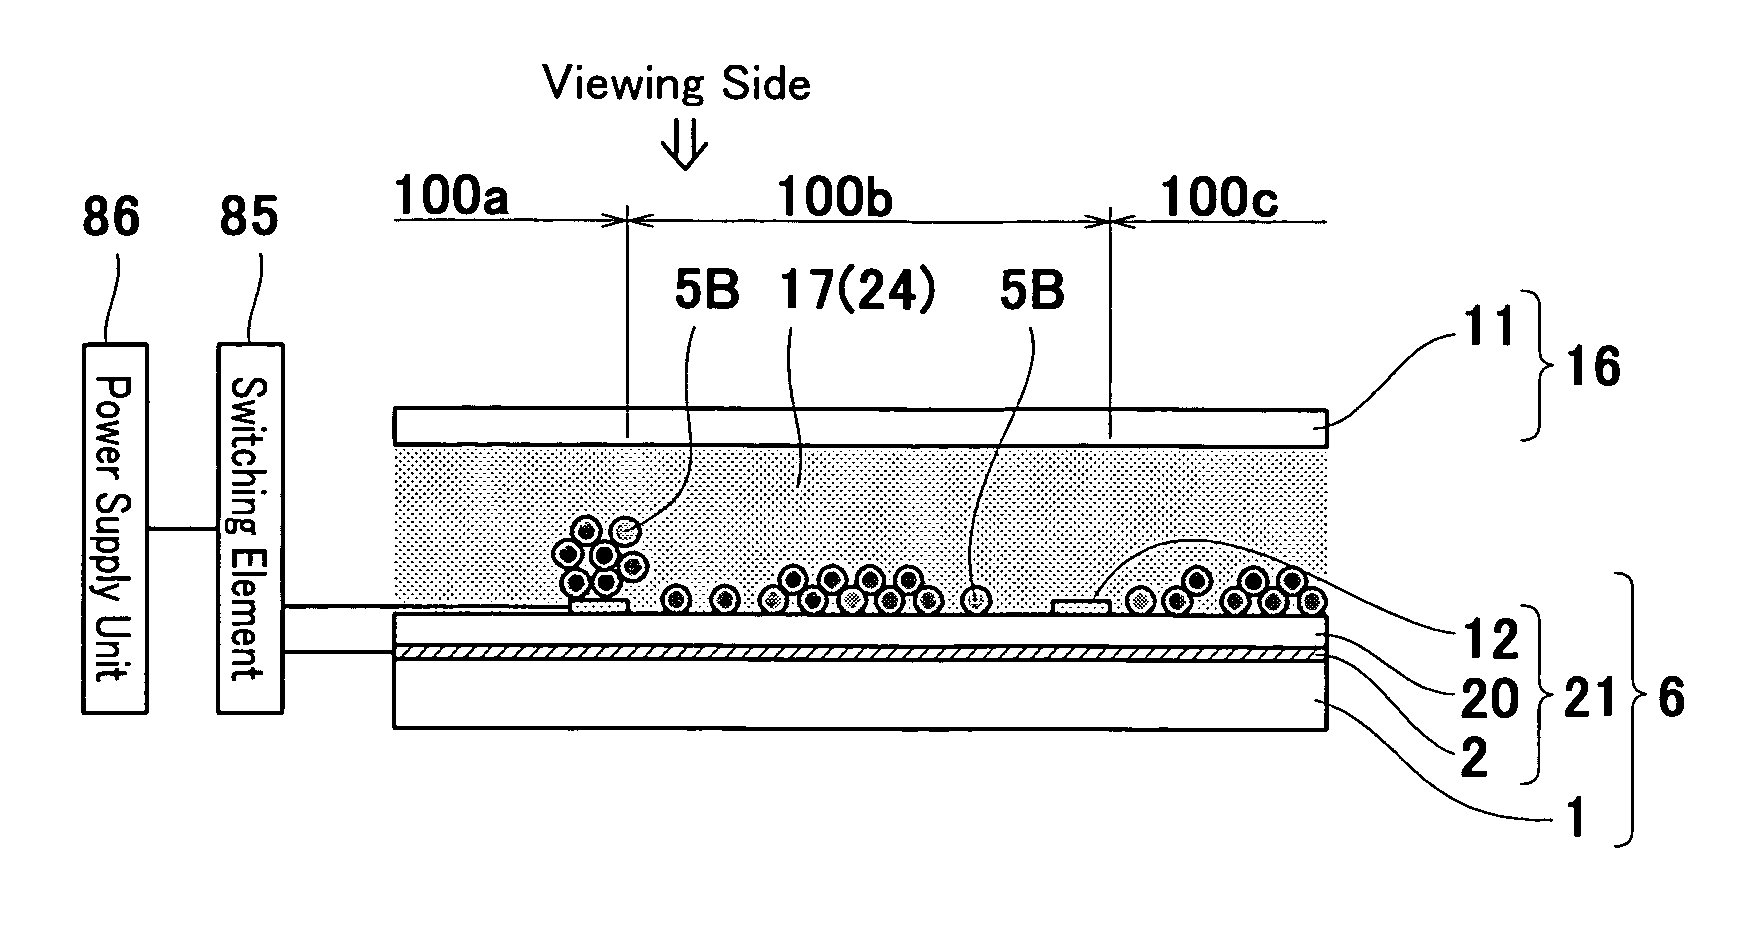 Display device and method of manufacturing same